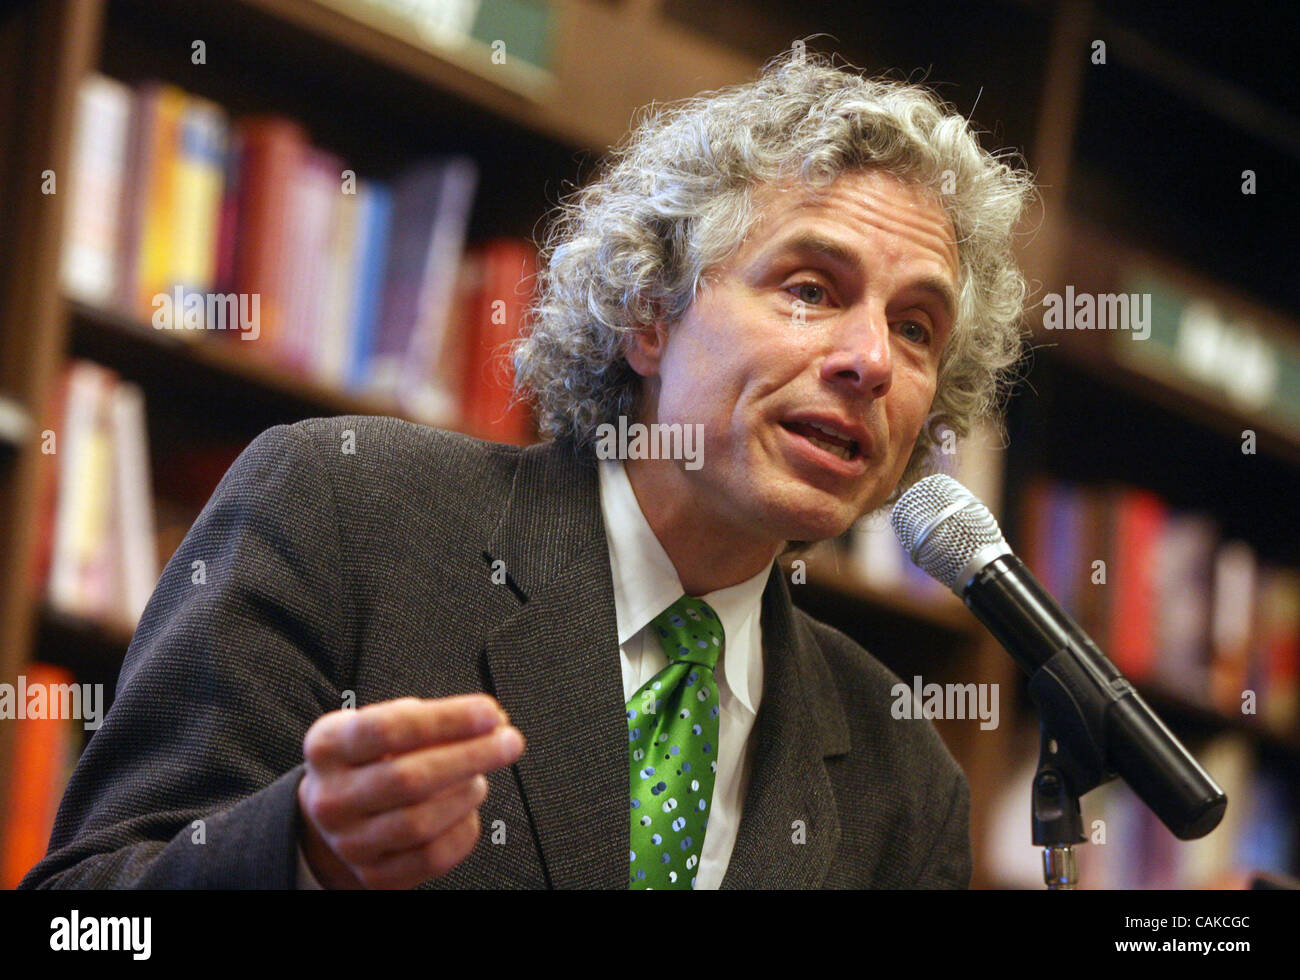 Sep 14, 2007 - New York, NY, USA - Author, experimental psychologist, cognitive scientist STEVEN PINKER promotes his new book 'The Stuff of Thought: Language as a Window into Human Nature' held at Barnes & Noble Upper West Side. (Credit Image: © Nancy Kaszerman/ZUMA Press) Stock Photo